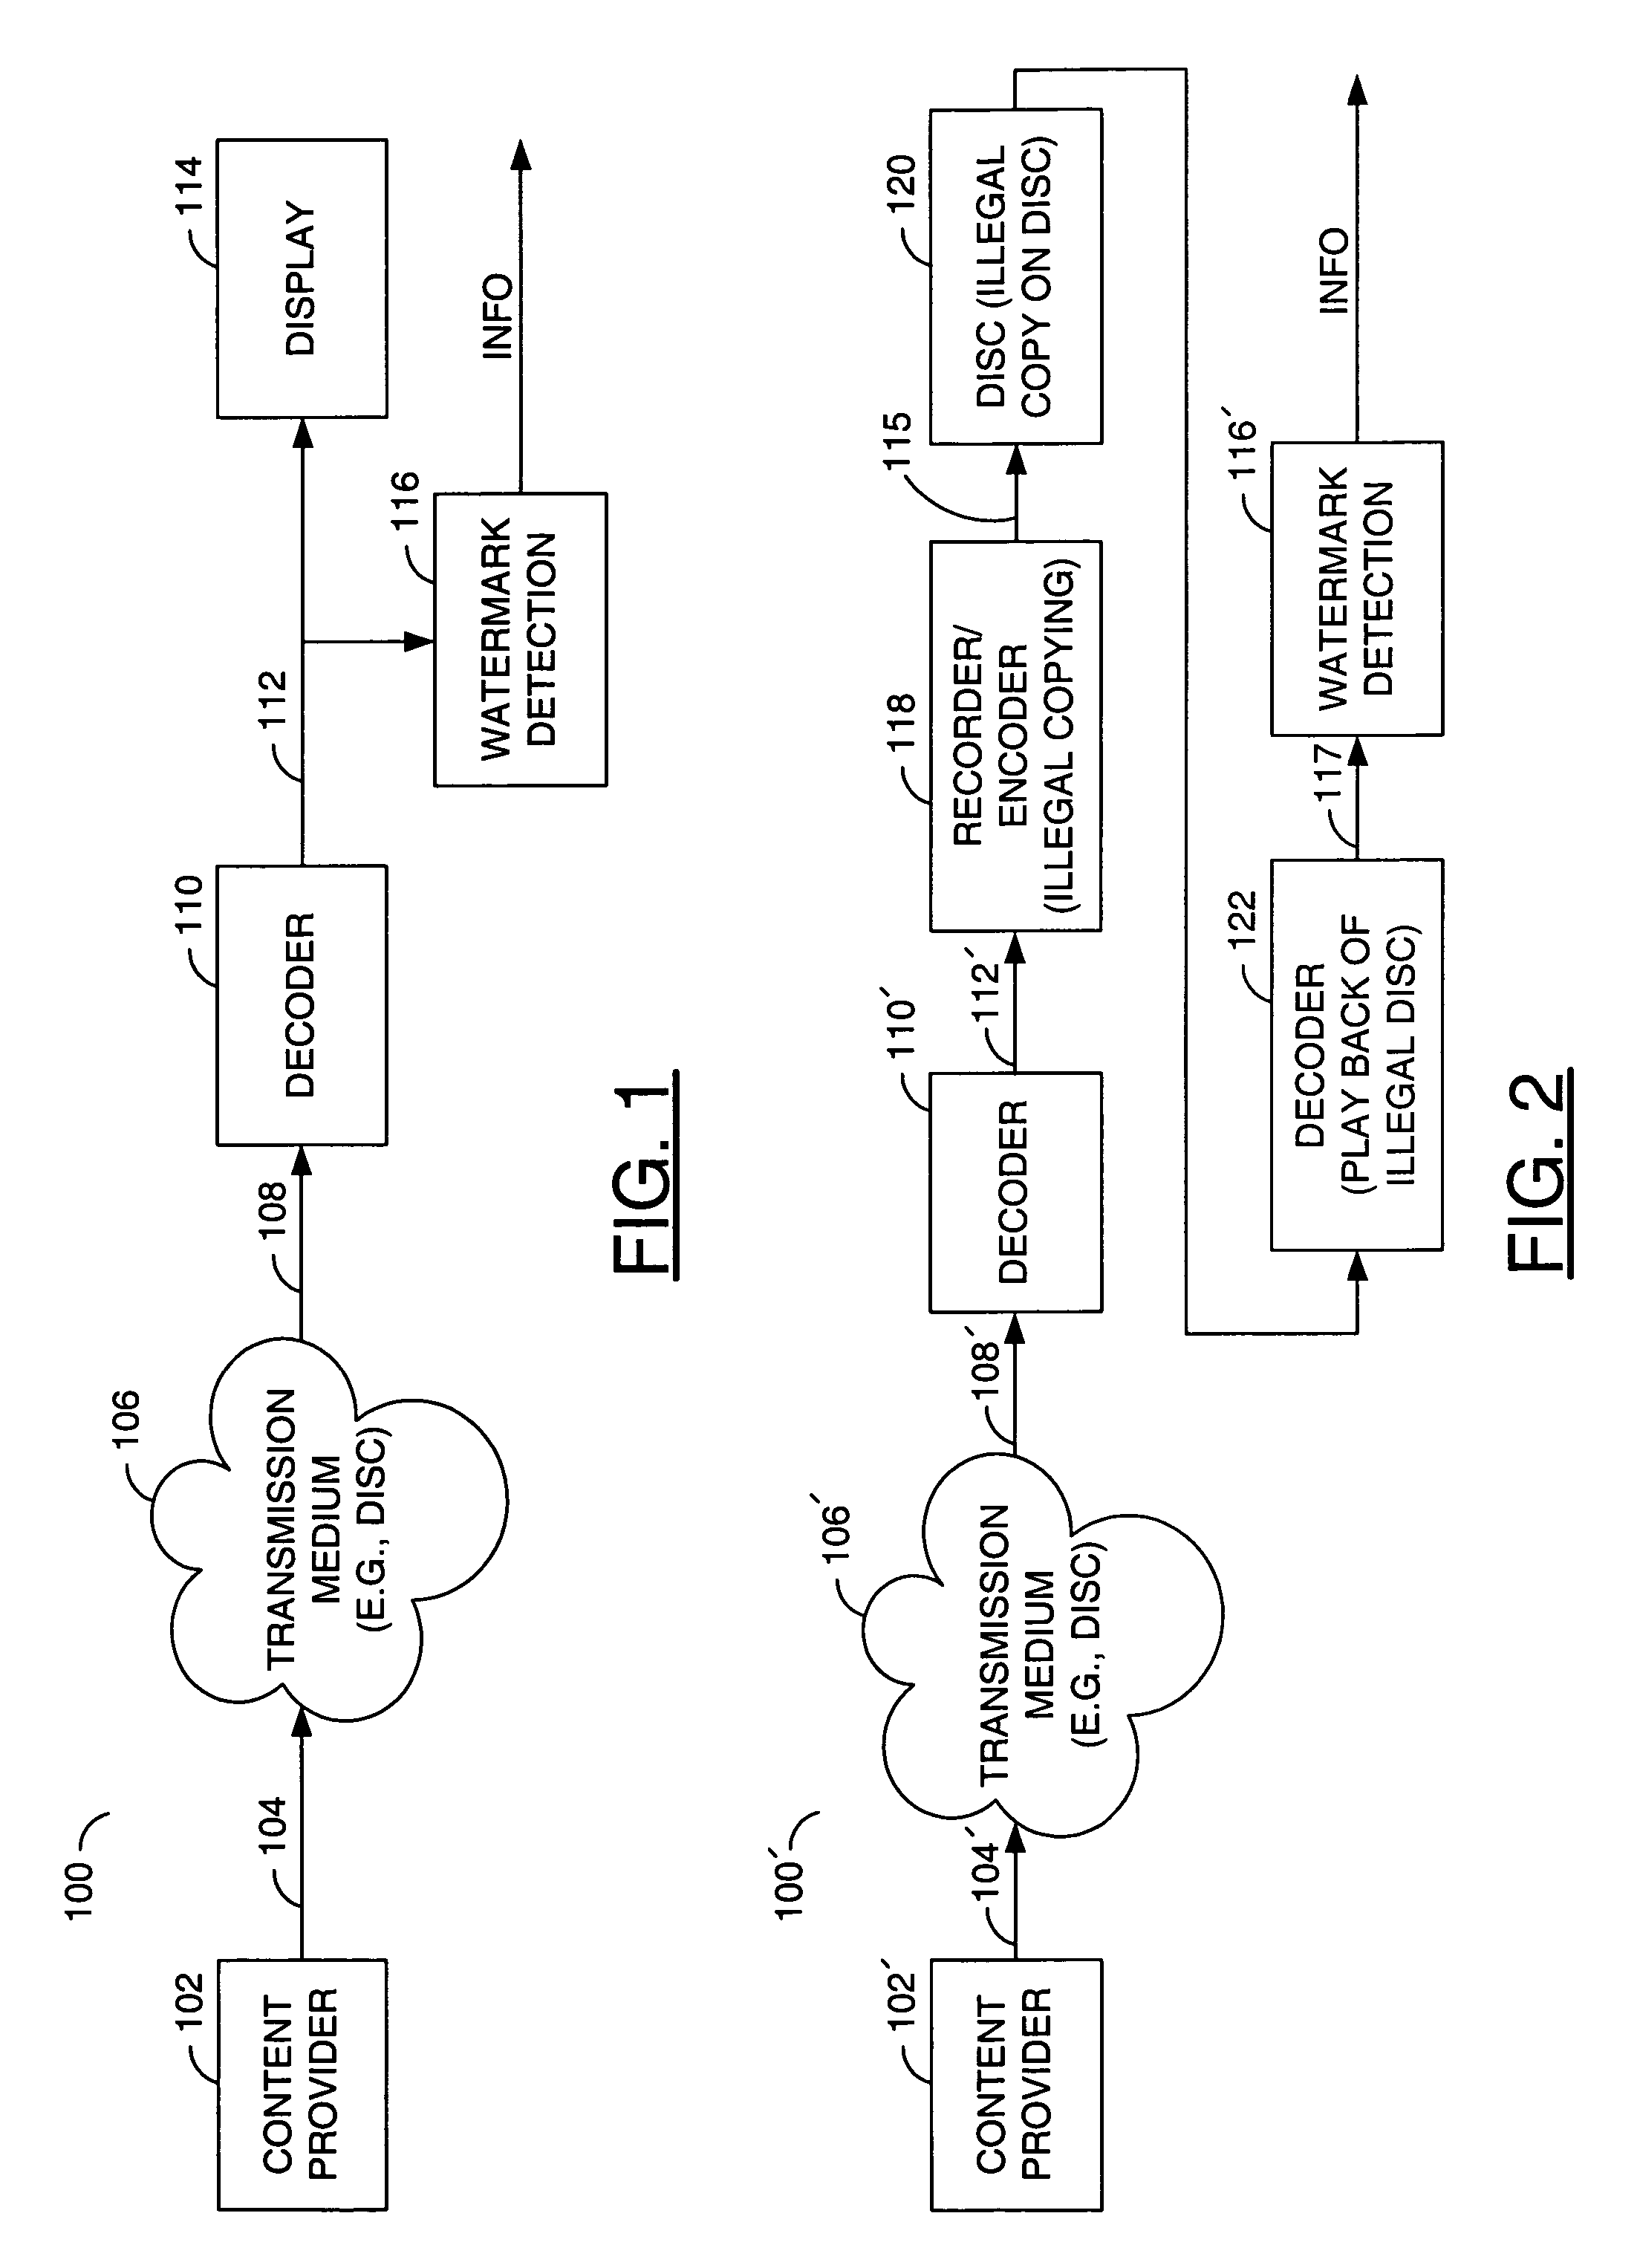 Method and/or apparatus for video watermarking and steganography using simulated film grain